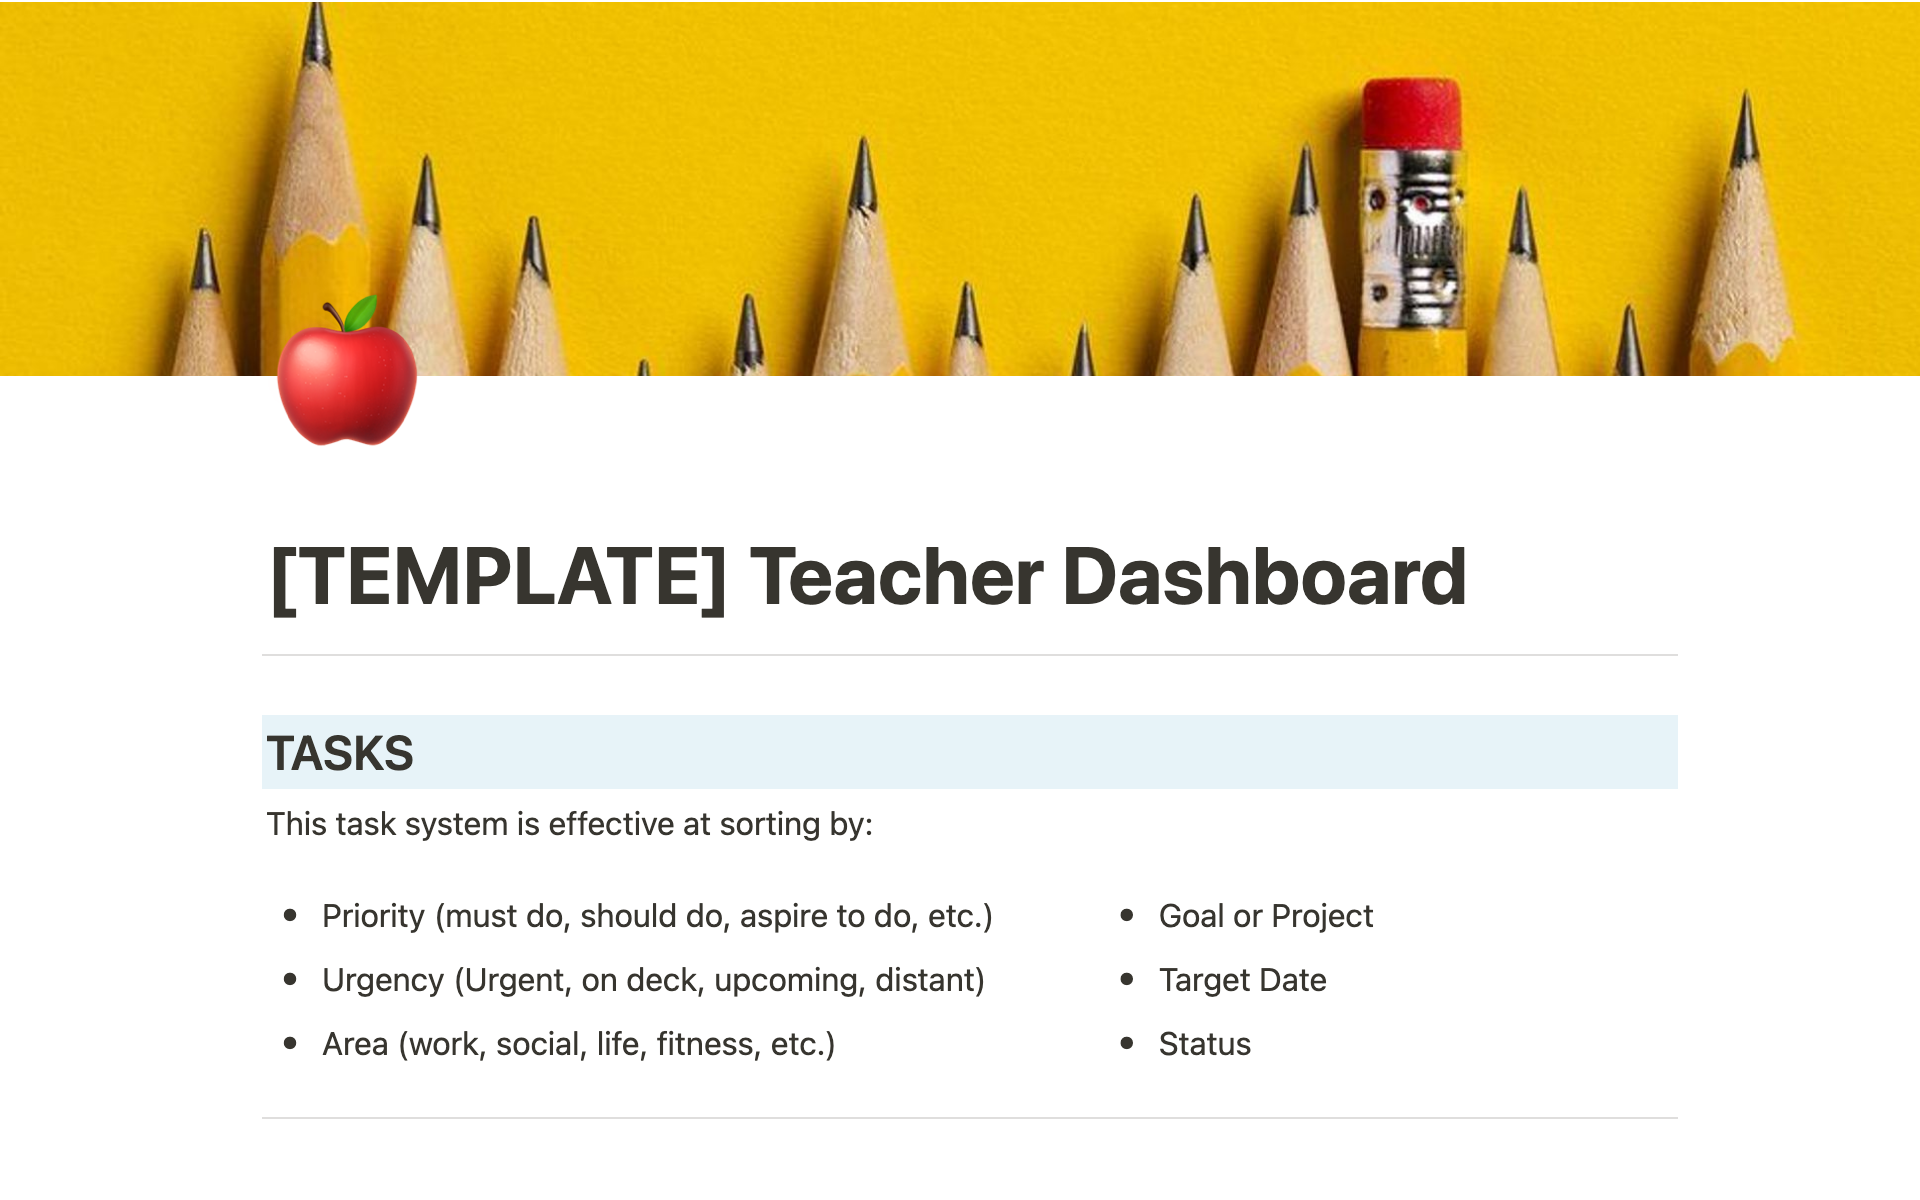 This is an all-in-one dashboard for teachers, including a task management system, curriculum development tools, continuing education tracking, and reflection tools.